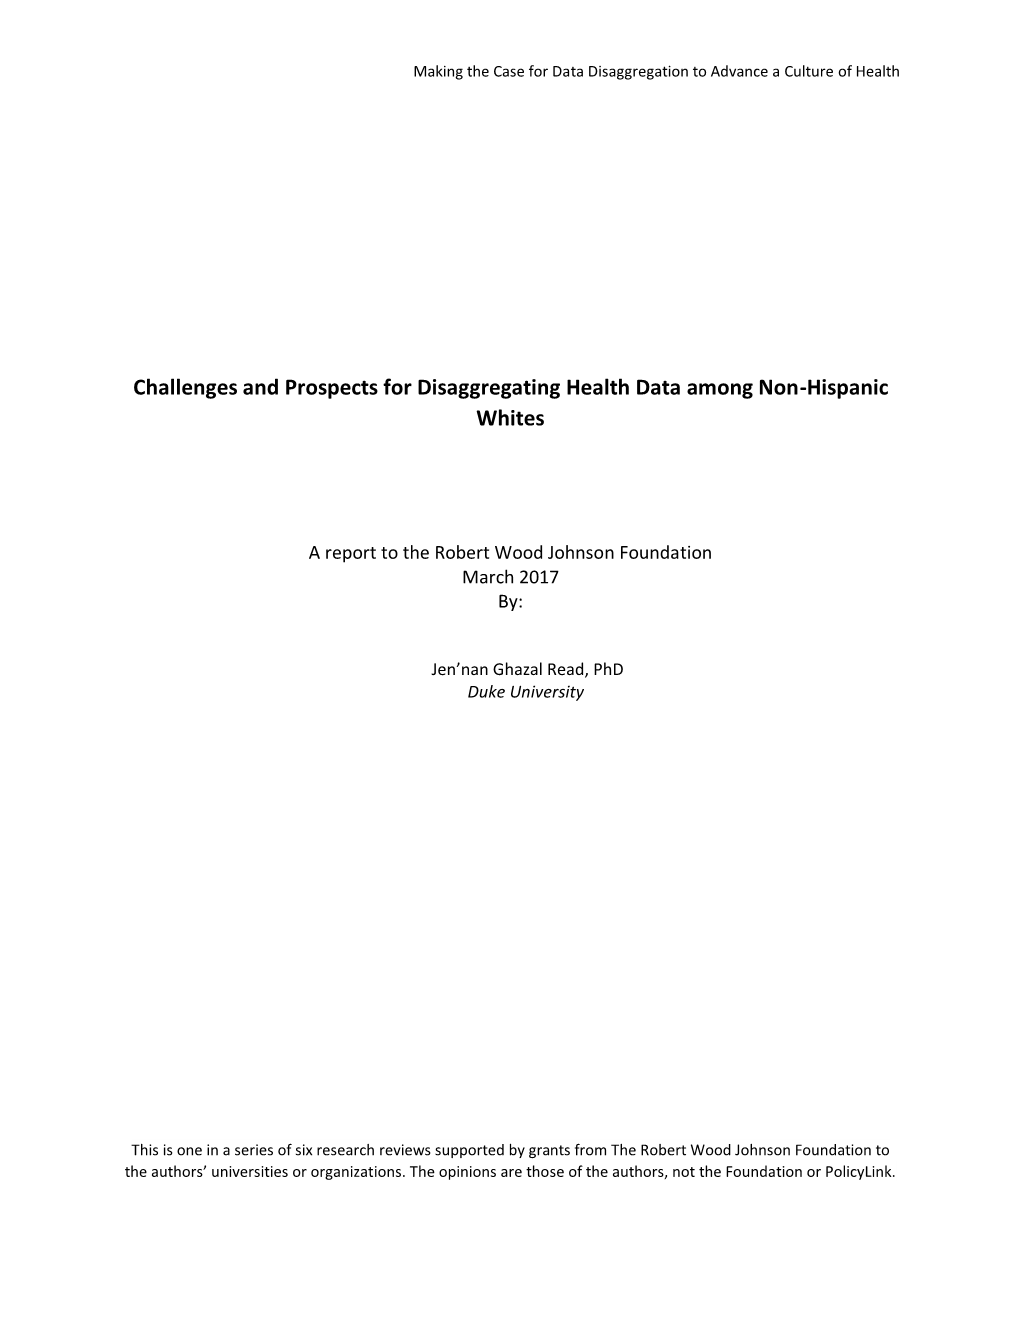 Challenges and Prospects for Disaggregating Health Data Among Non-Hispanic Whites